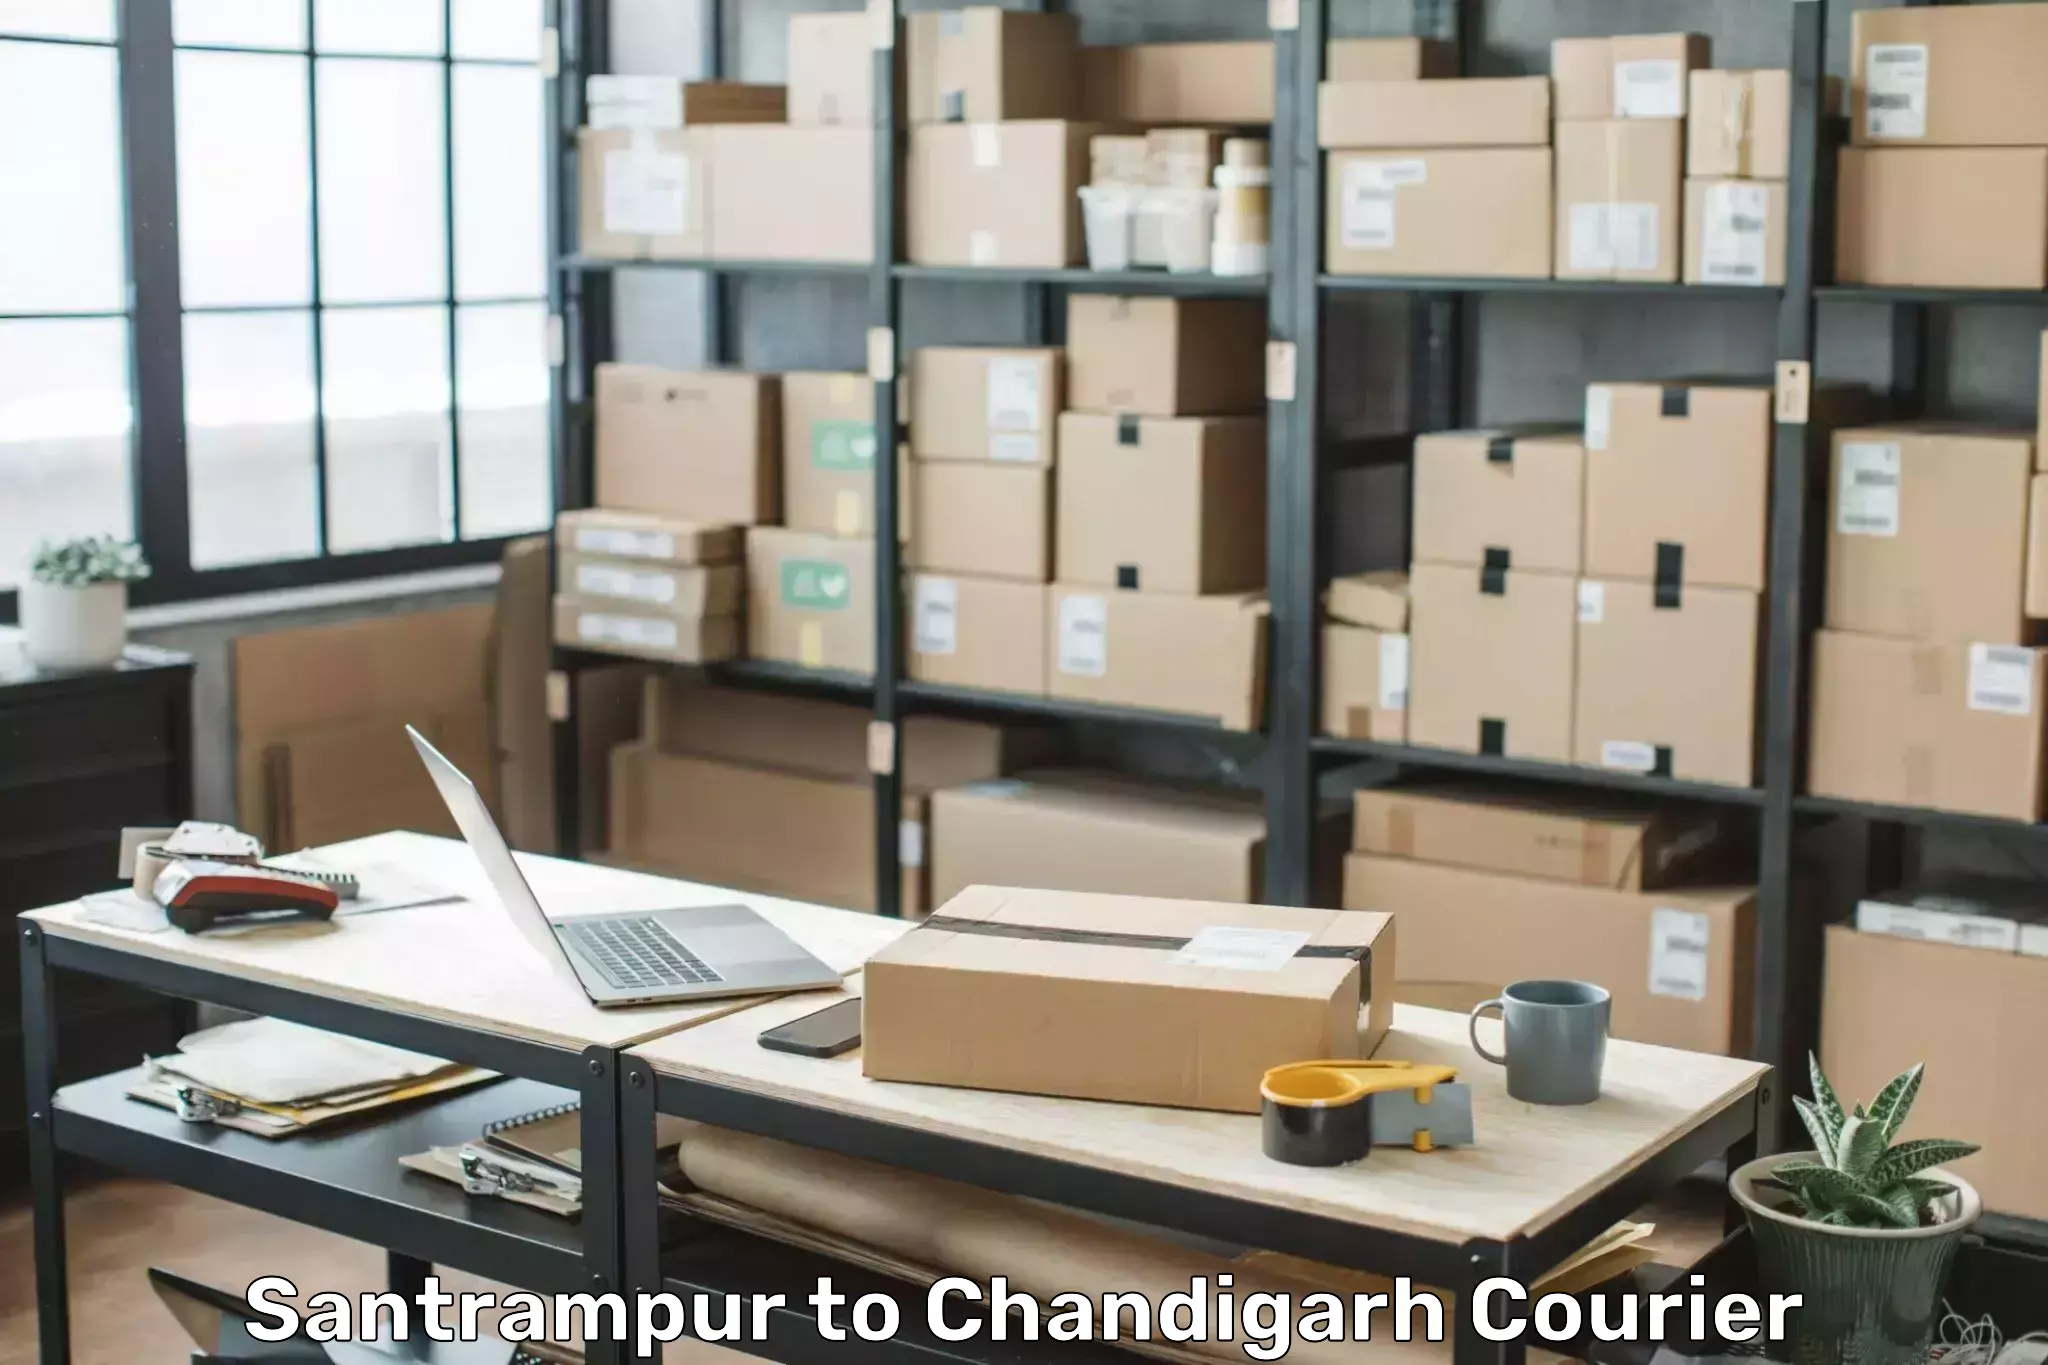 Personal effects shipping Santrampur to Chandigarh